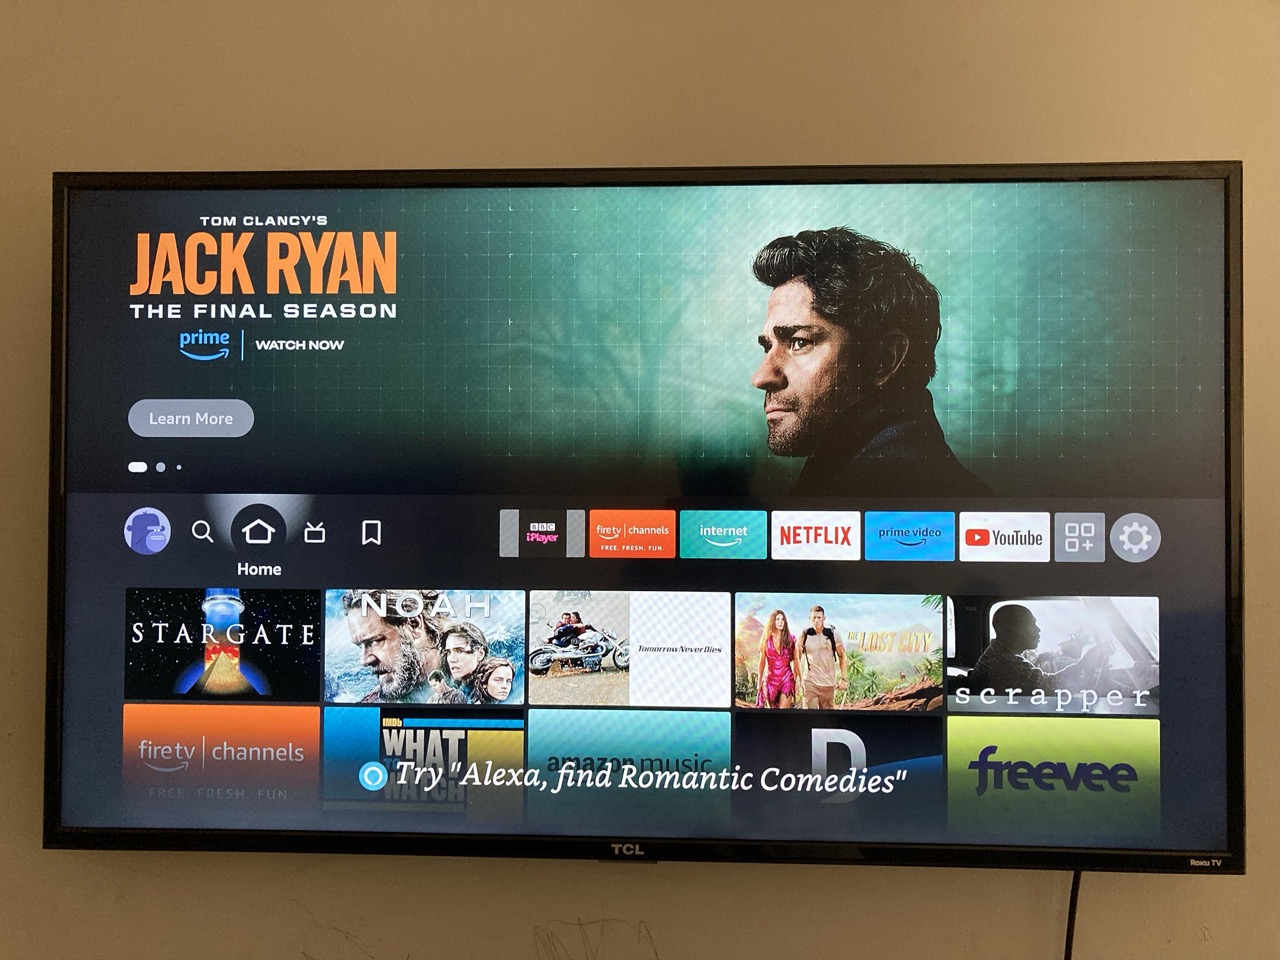 Fire TV Stick 4K Max hits new all-time low price of $39.99 — Regular 4K  Firestick down to $24.99